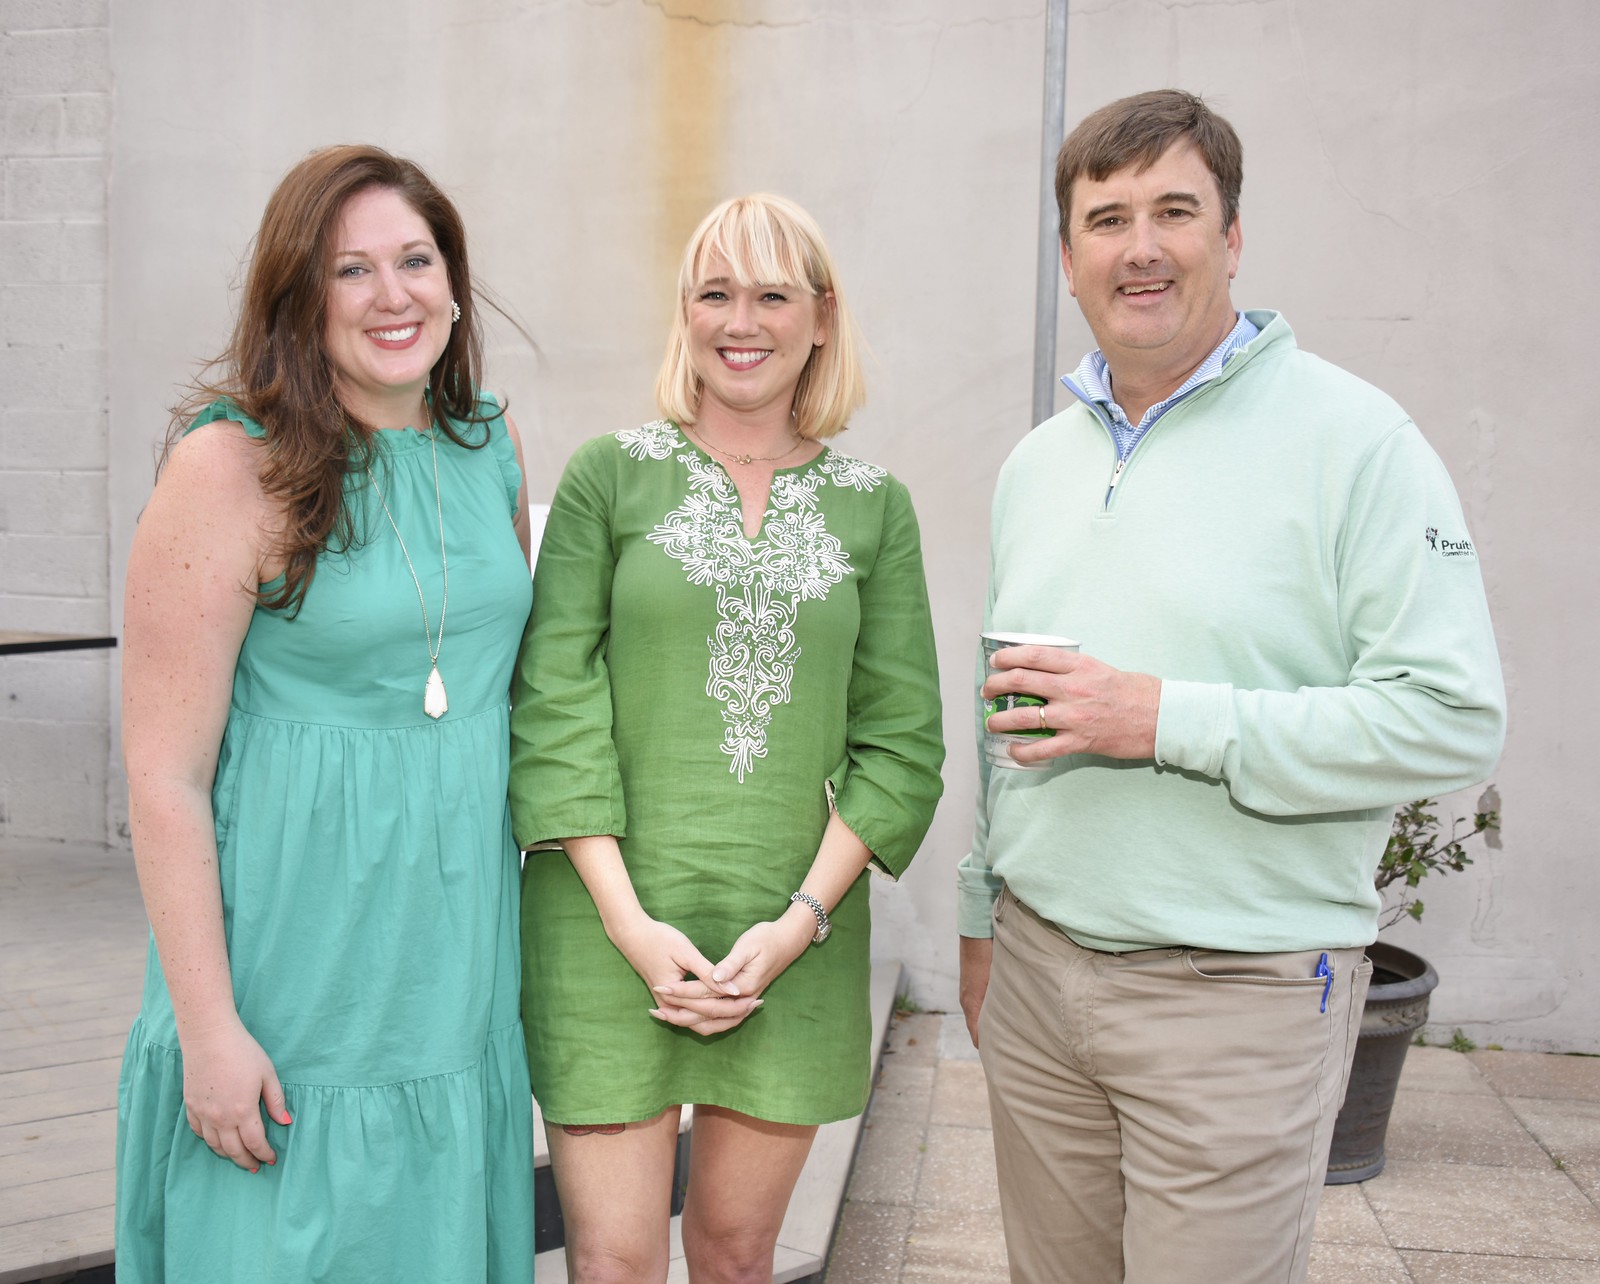 Savannah Downtown Business Association To-Go Cup Launch